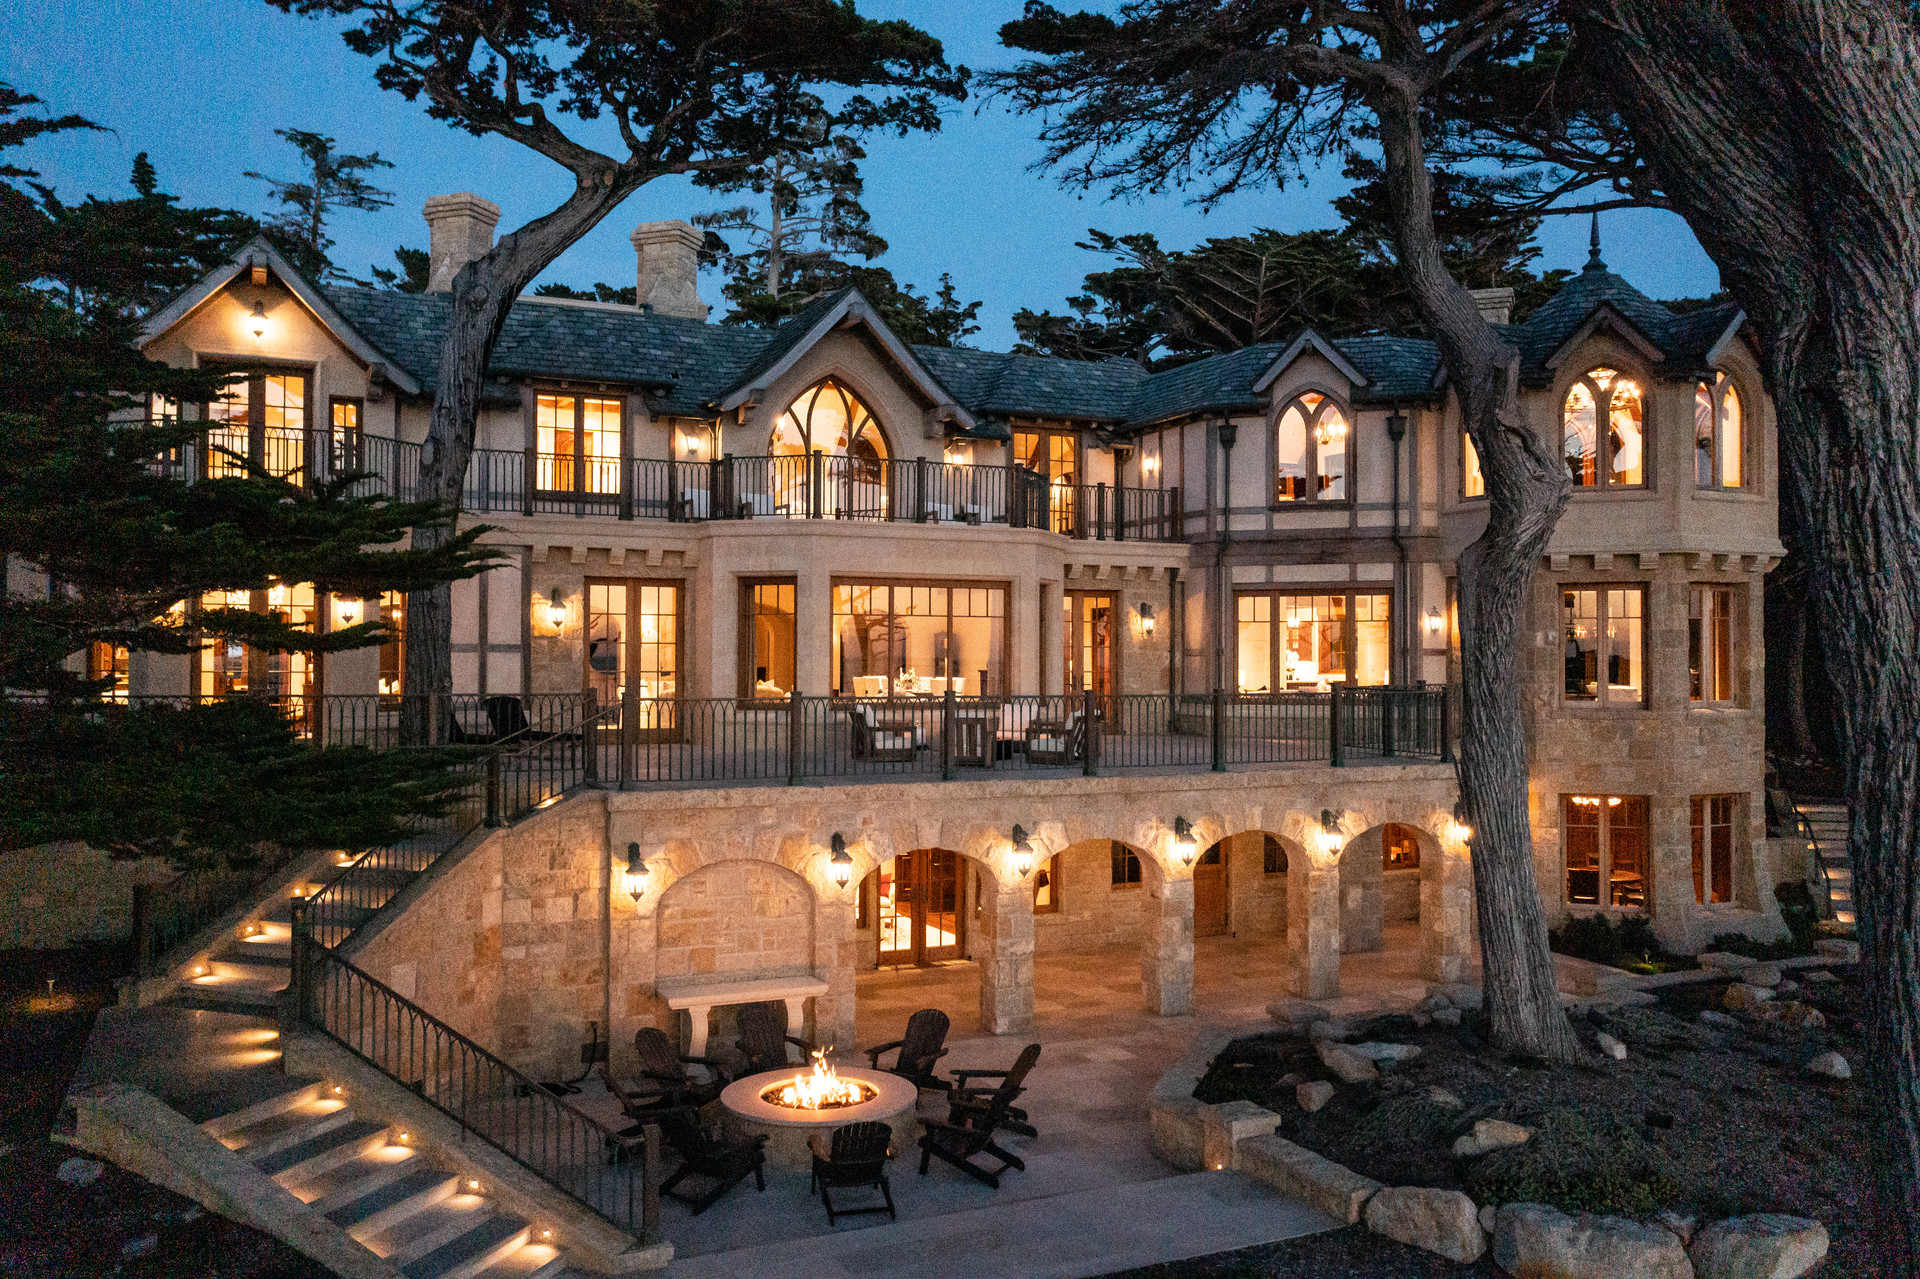 World-Class-Mansion-in-Pebble-Beach-on-Breathtaking-Natural-Setting-for-Sale-at-39800000-1